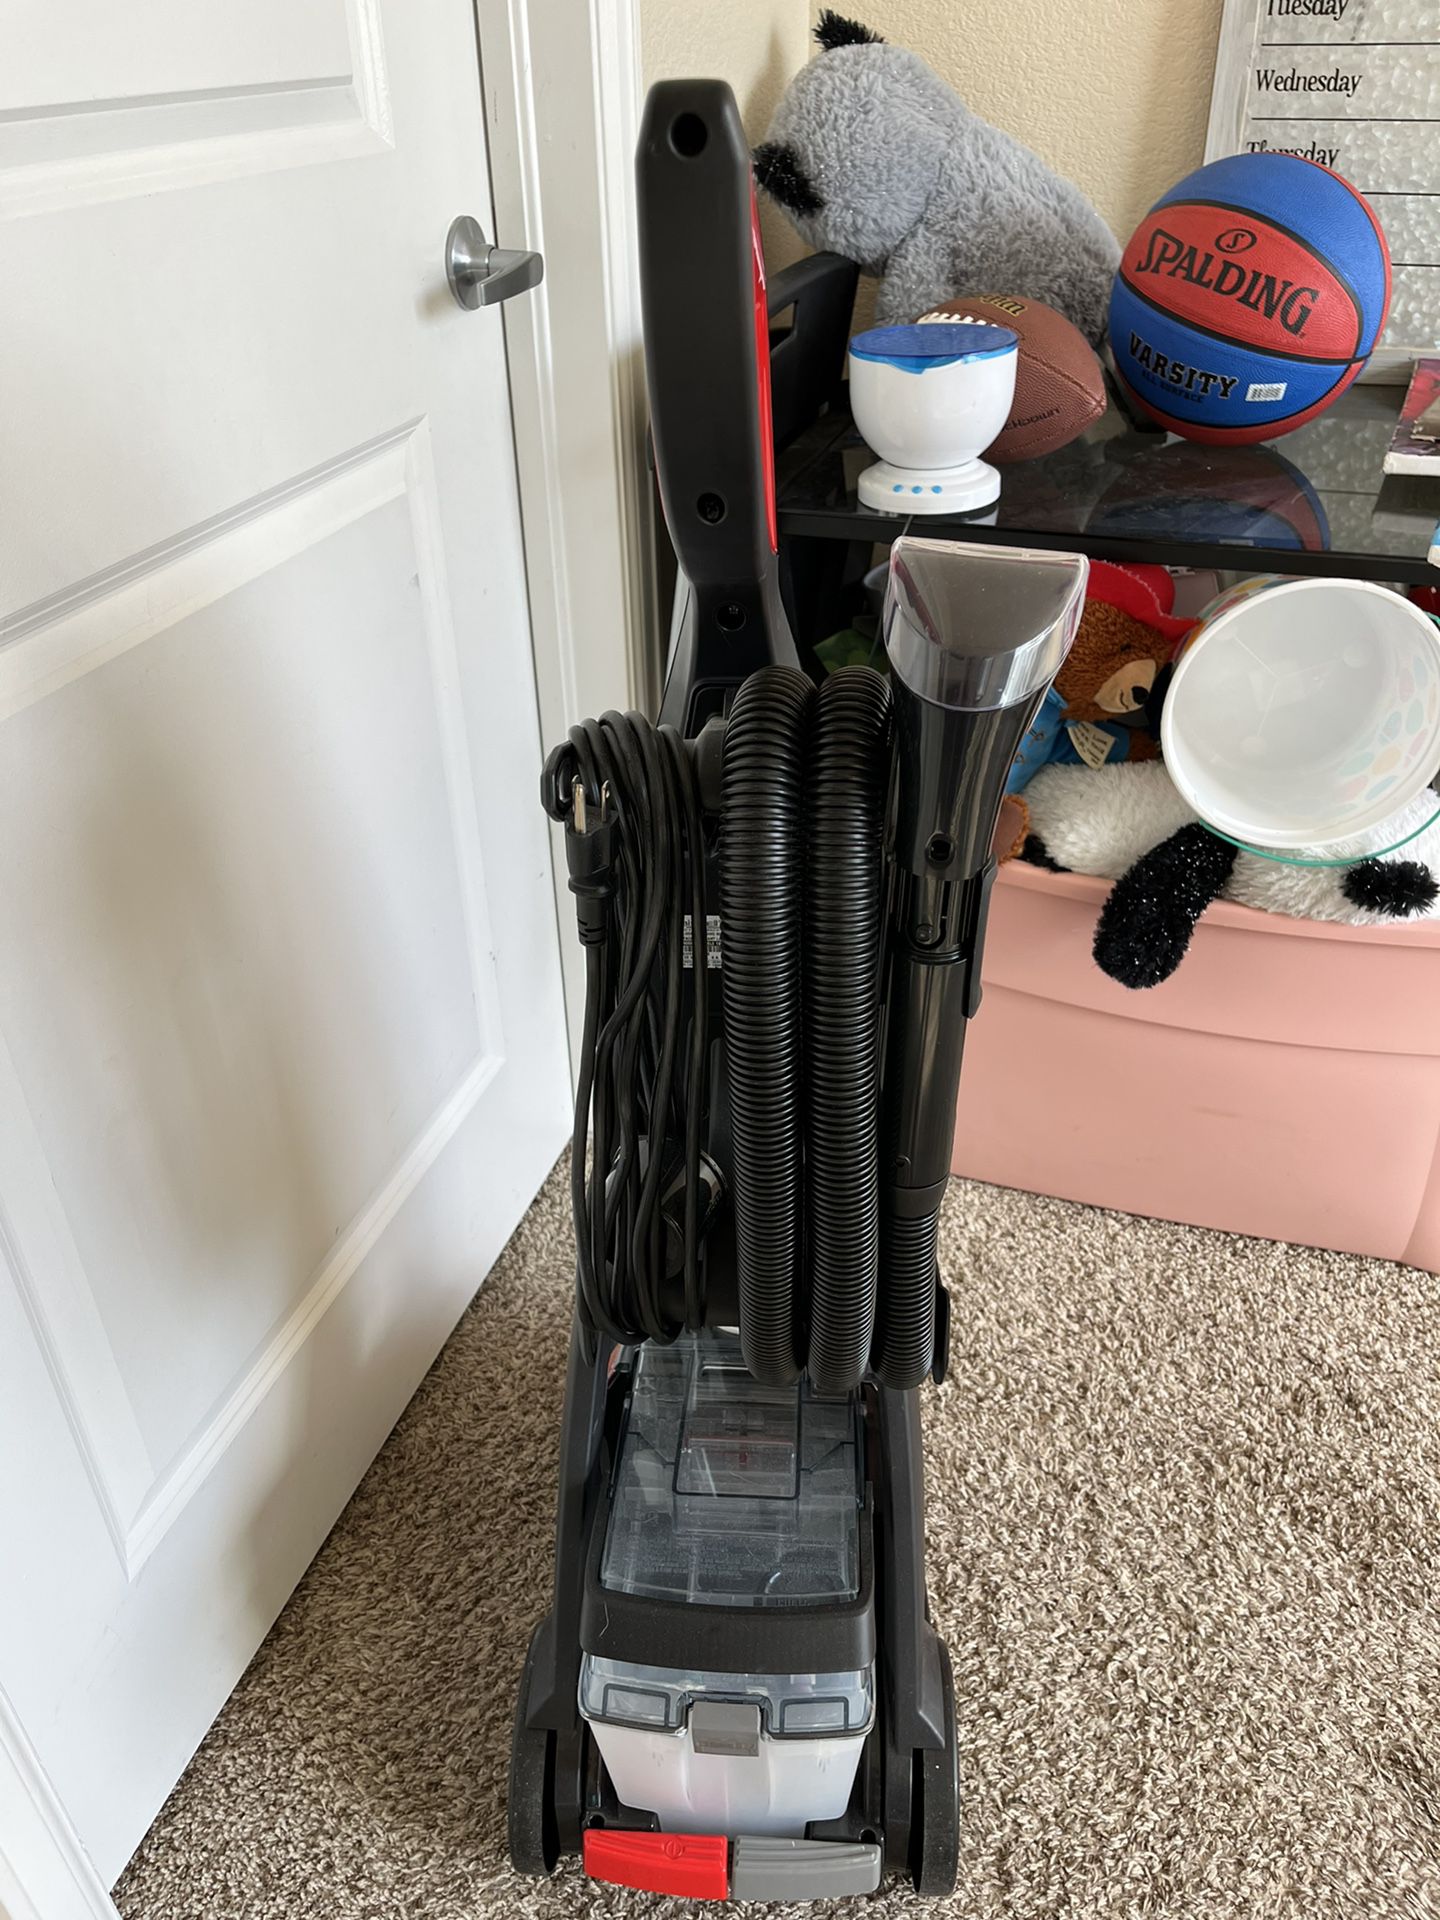 Heated Bissell Carpet Cleaner